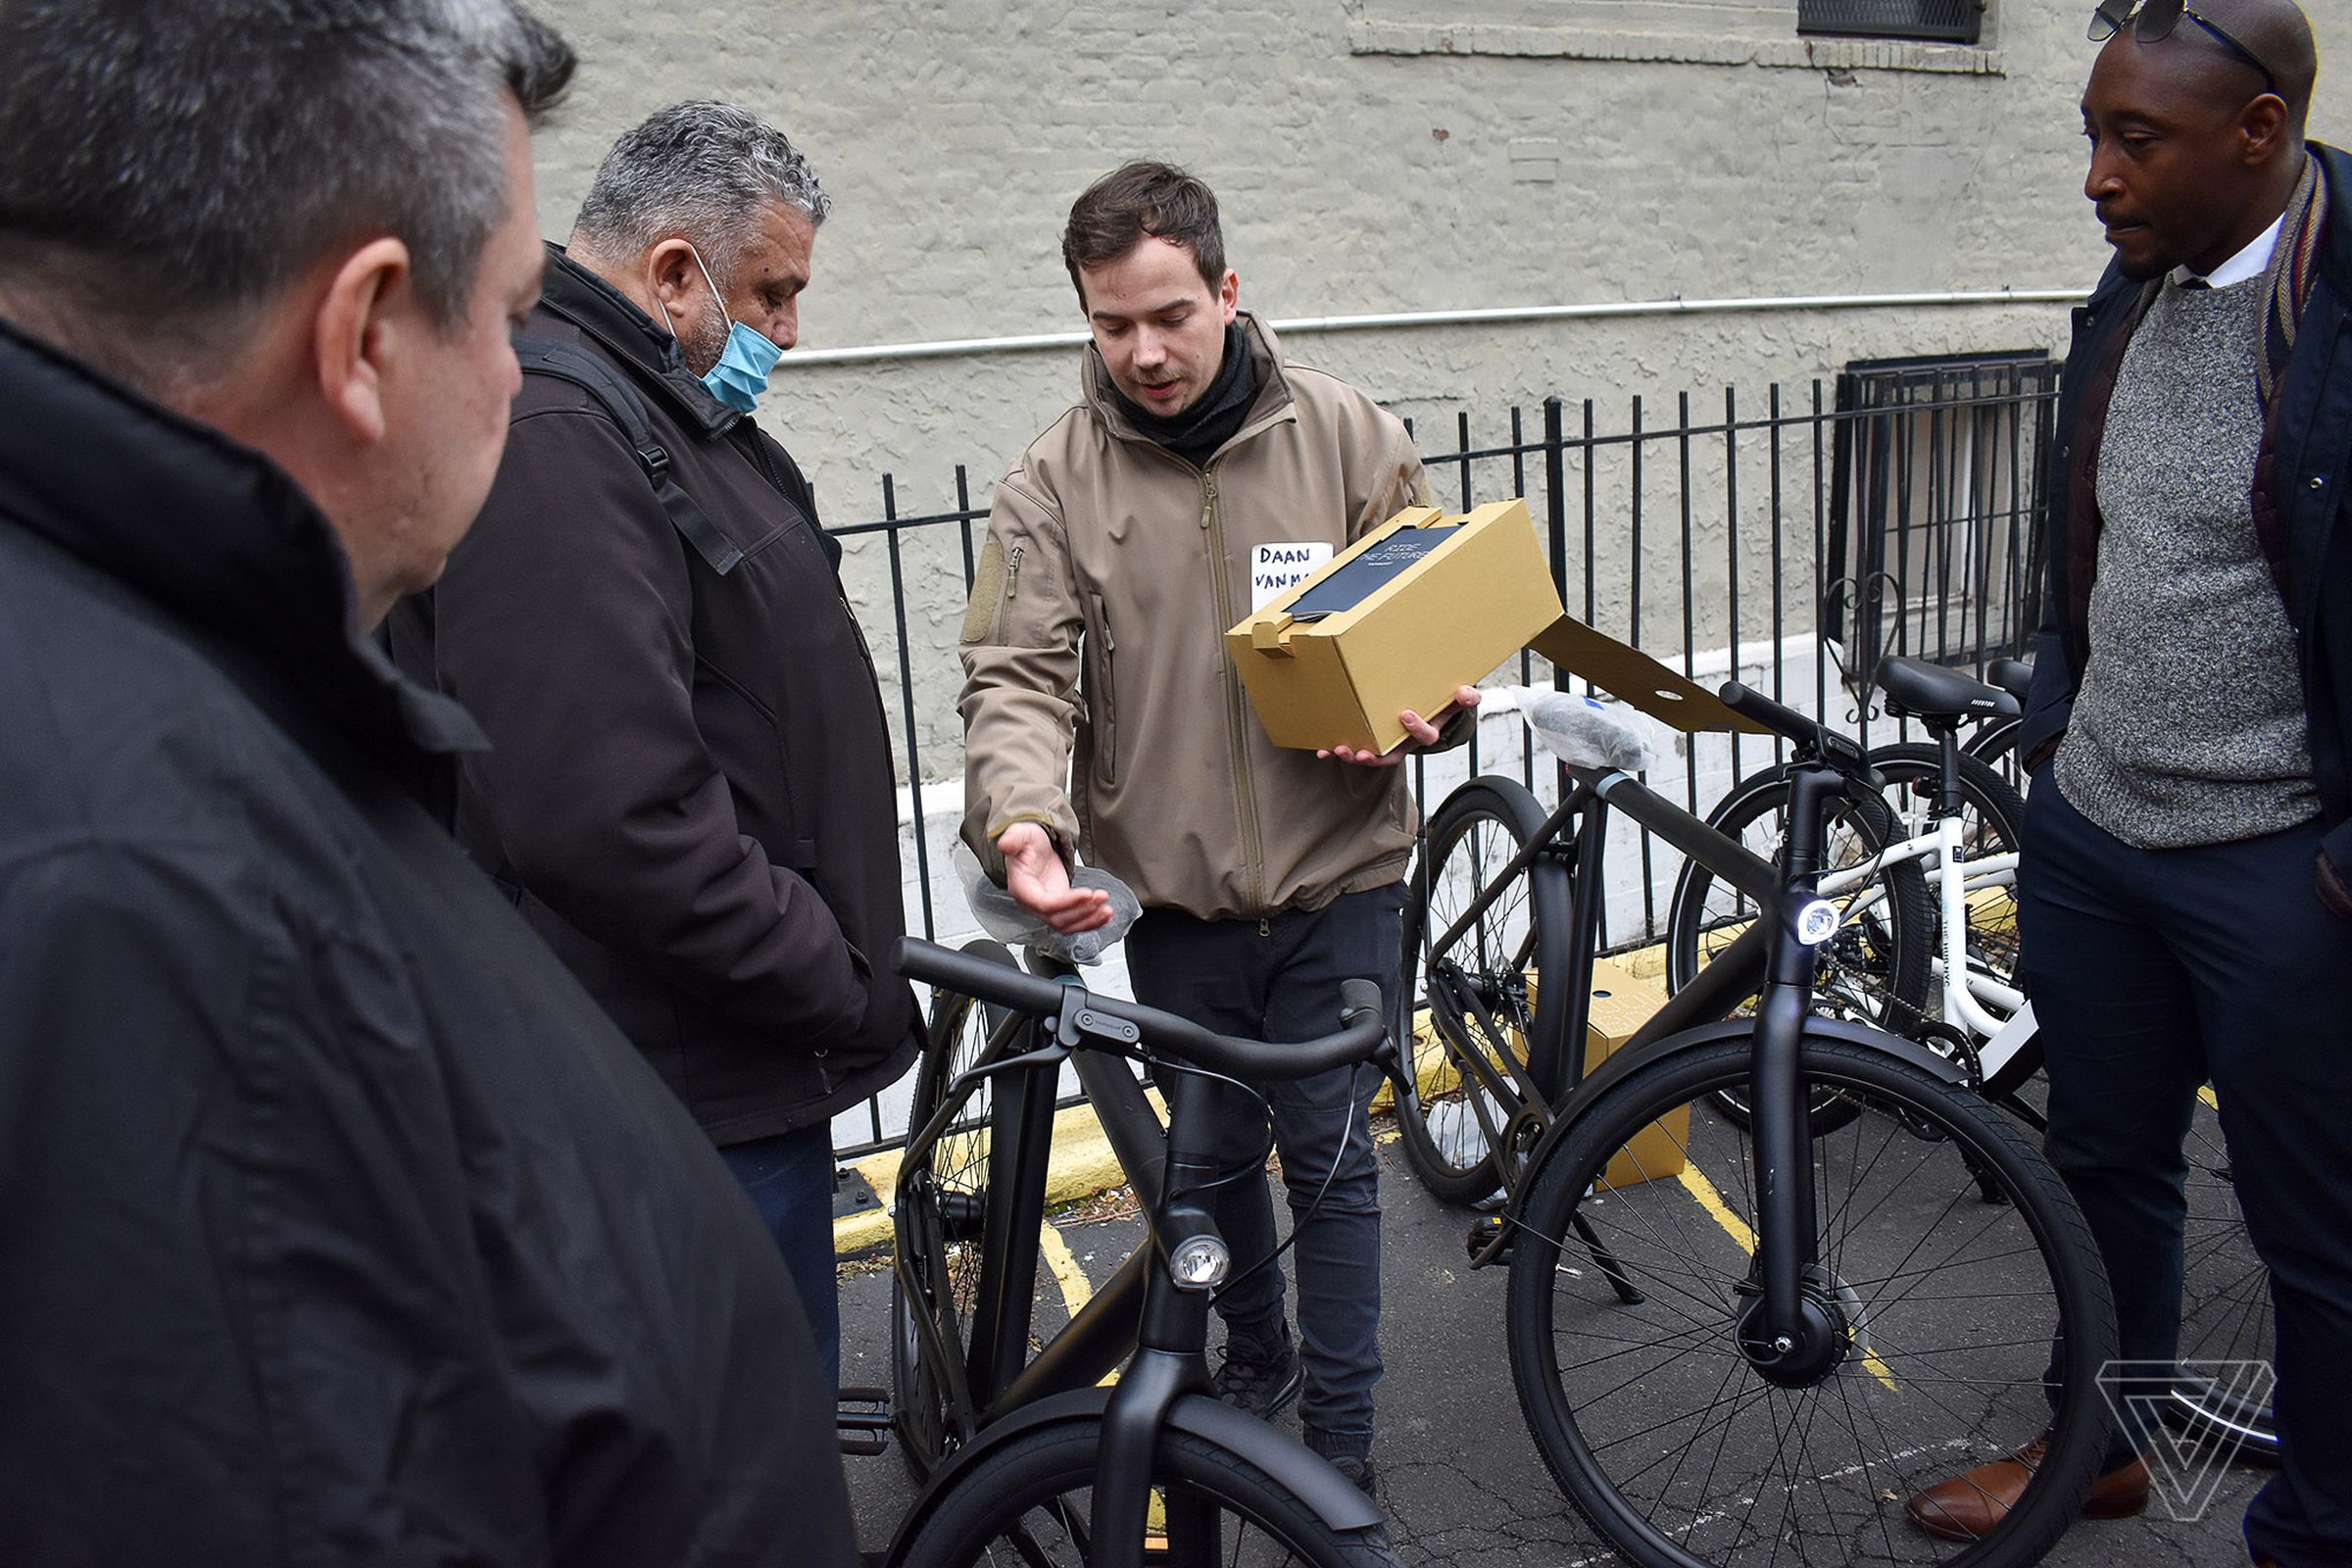 A representative from VanMoof gives an overview of the company’s e-bikes.